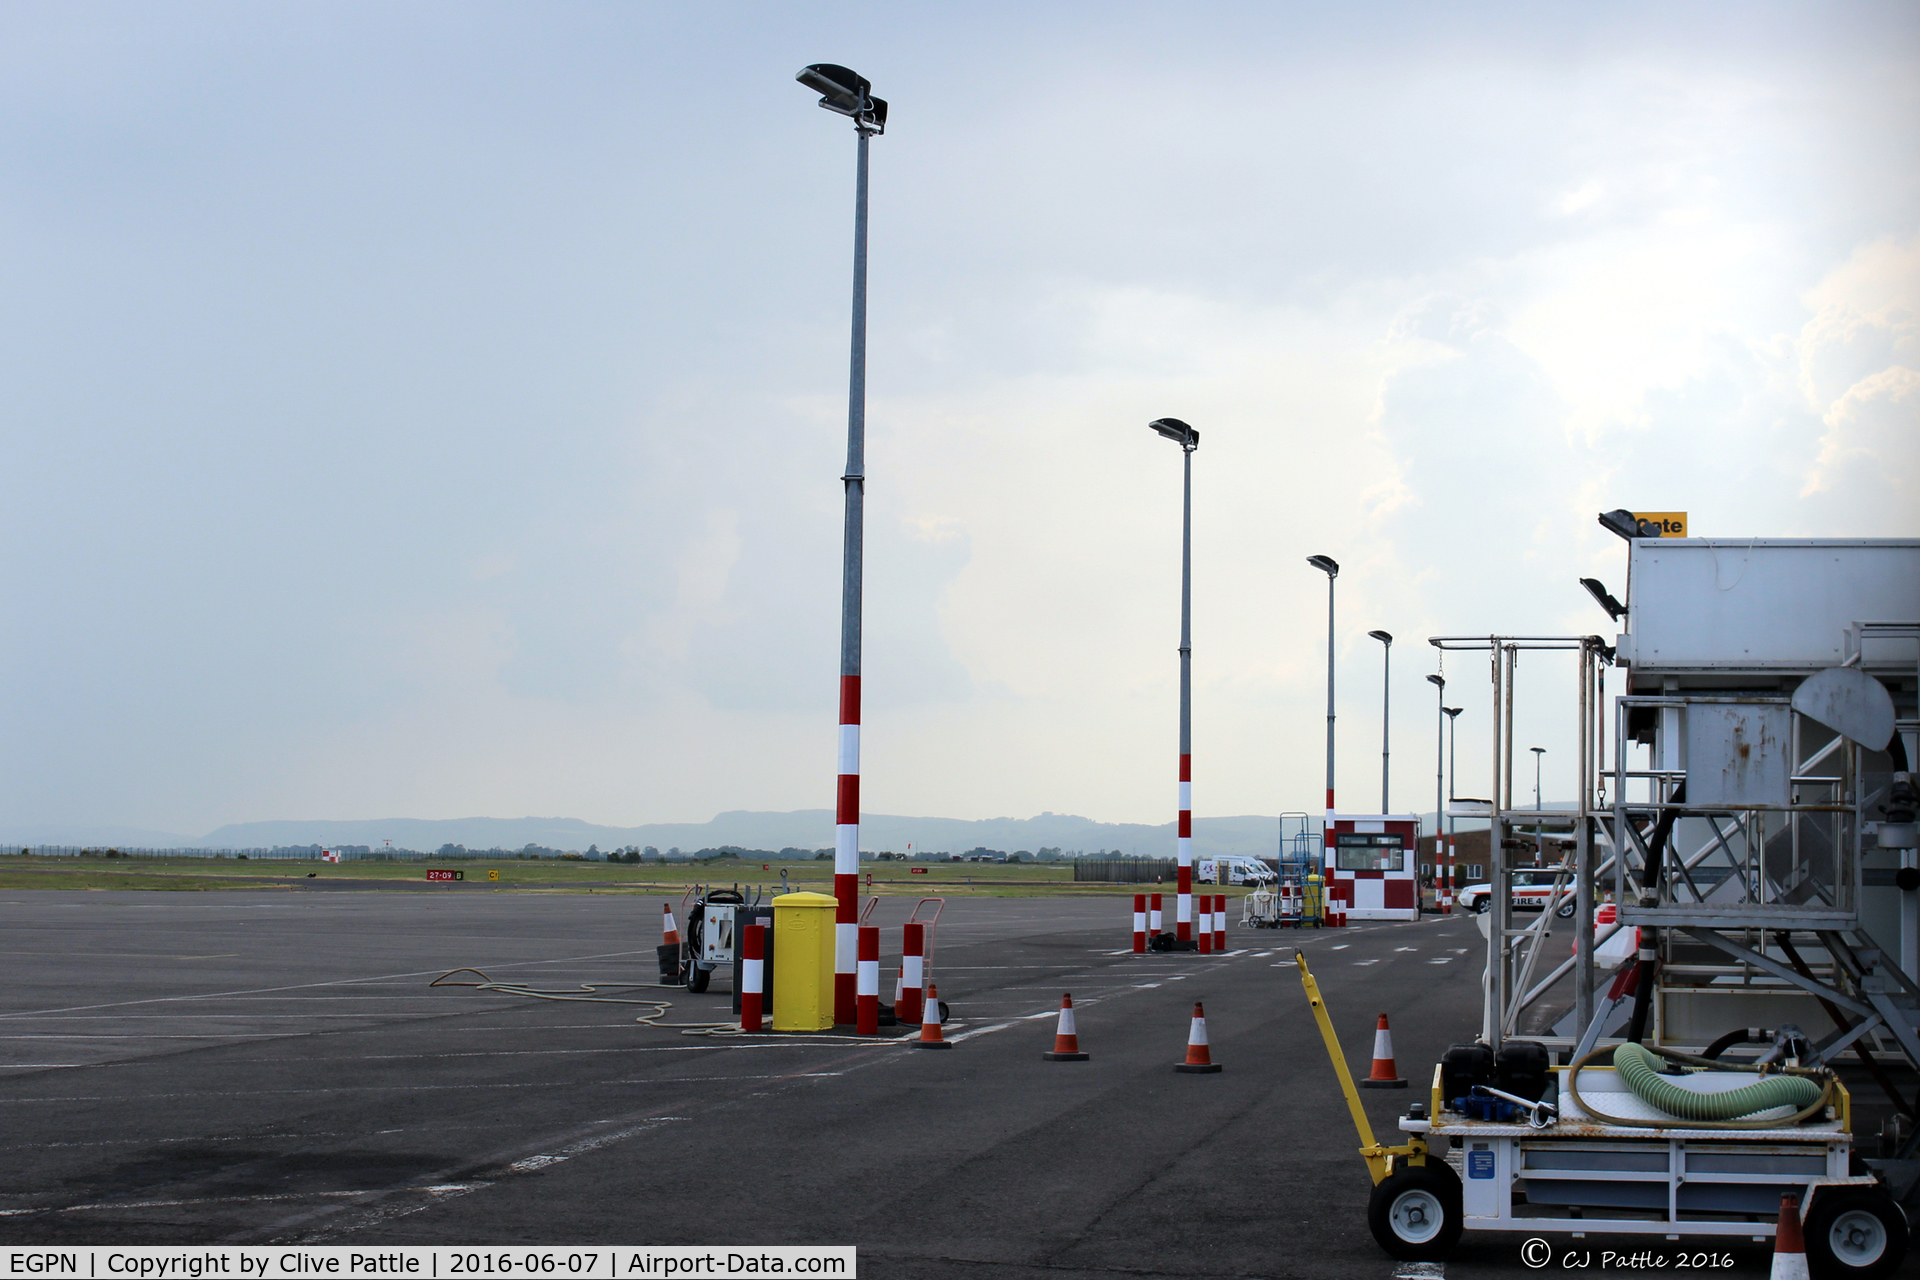 Dundee Airport, Dundee, Scotland United Kingdom (EGPN) - Main apron and passenger terminal at Dundee EGPN